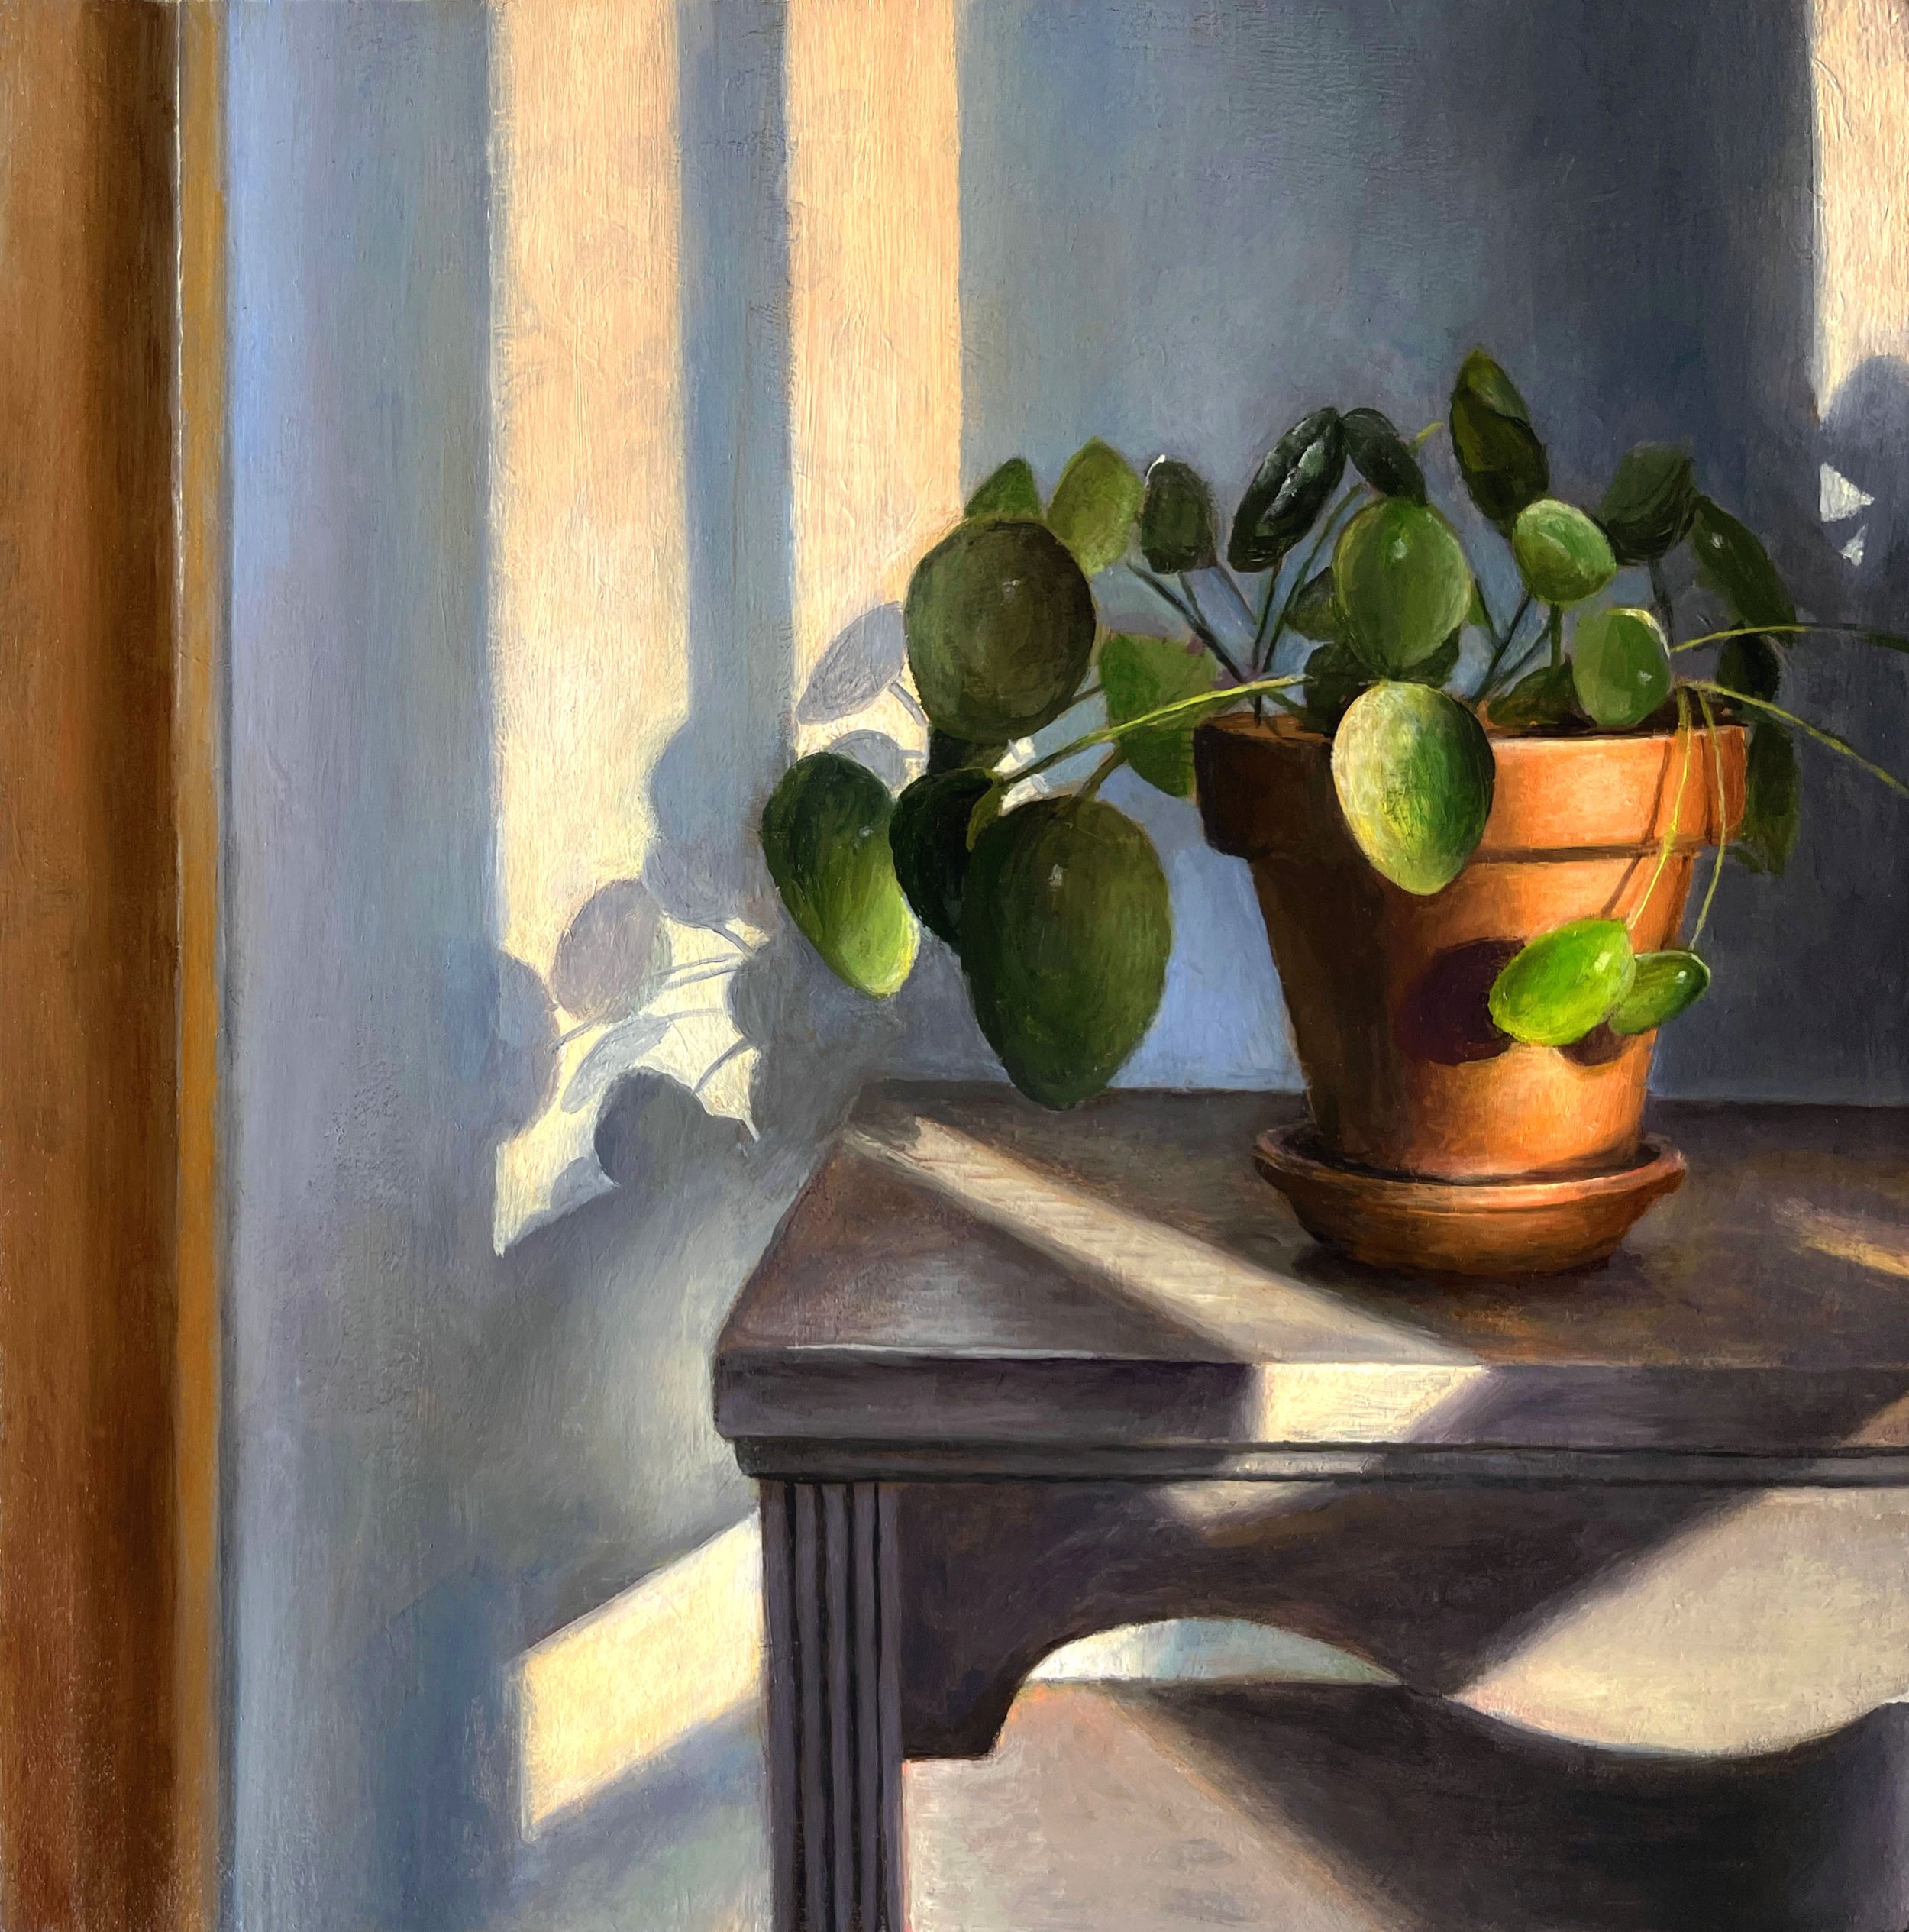   Plant in Window Light   2023  Oil on linen over panel  8 x 8 inches   